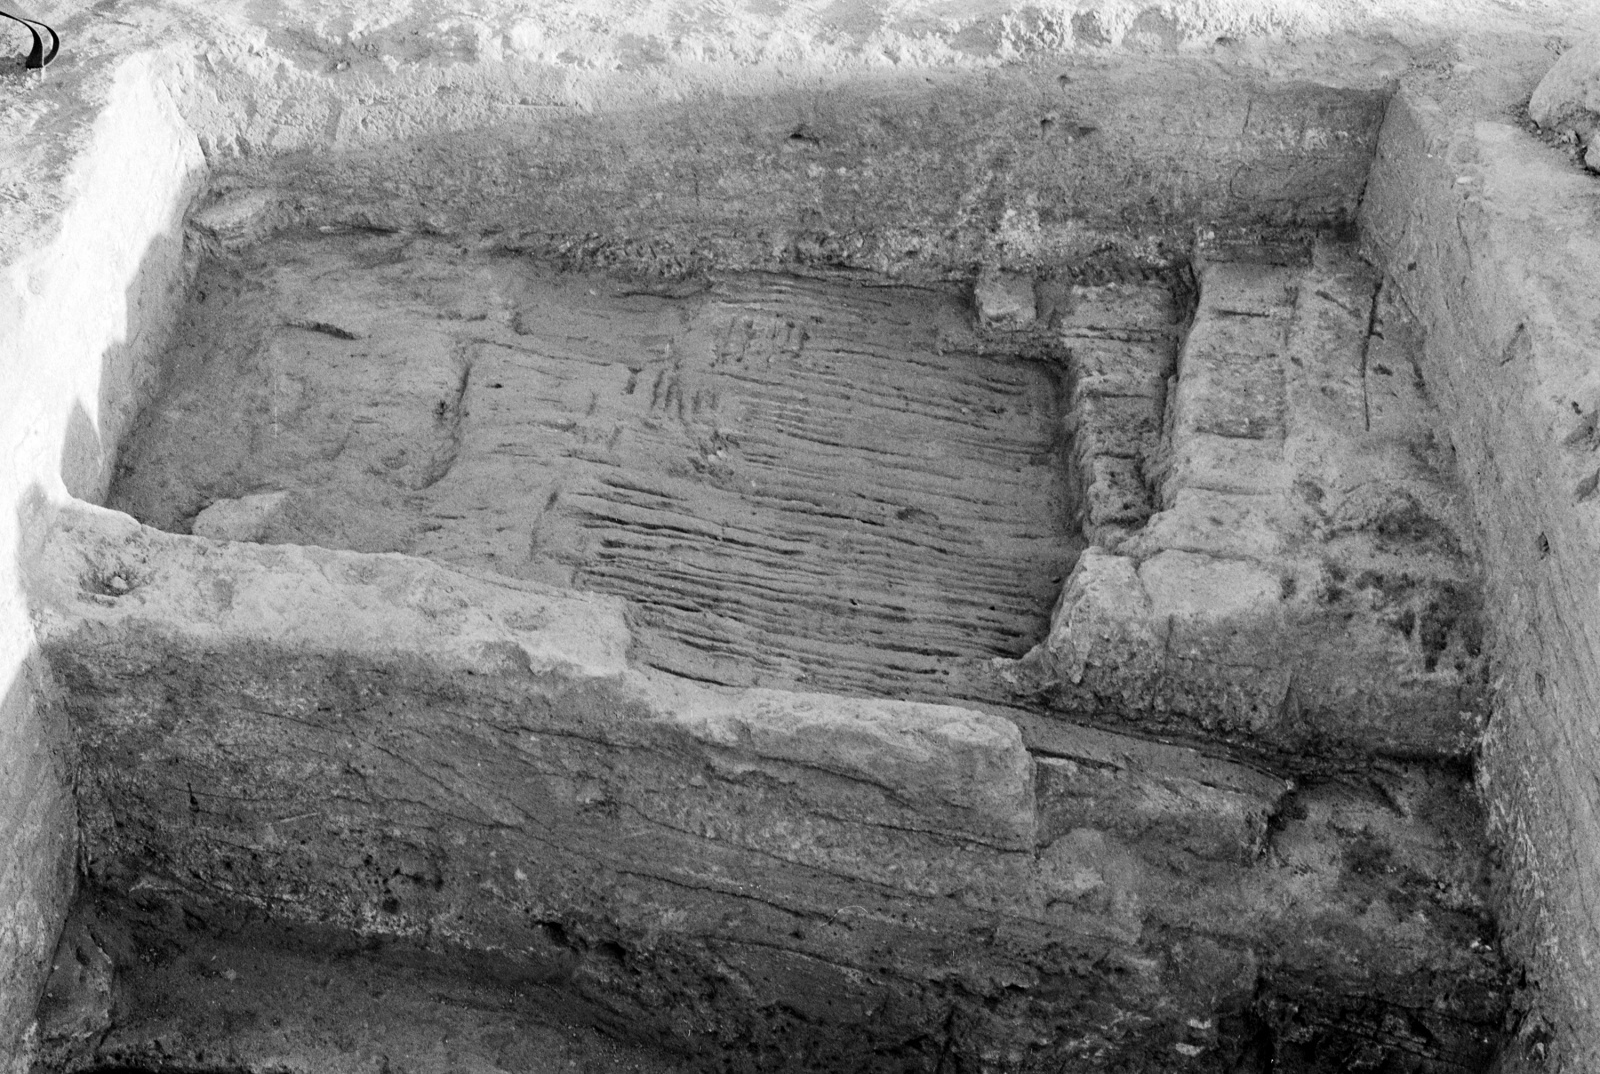 Oueli - Granary 87.71 well-preserved reed floor resting on low brick walls